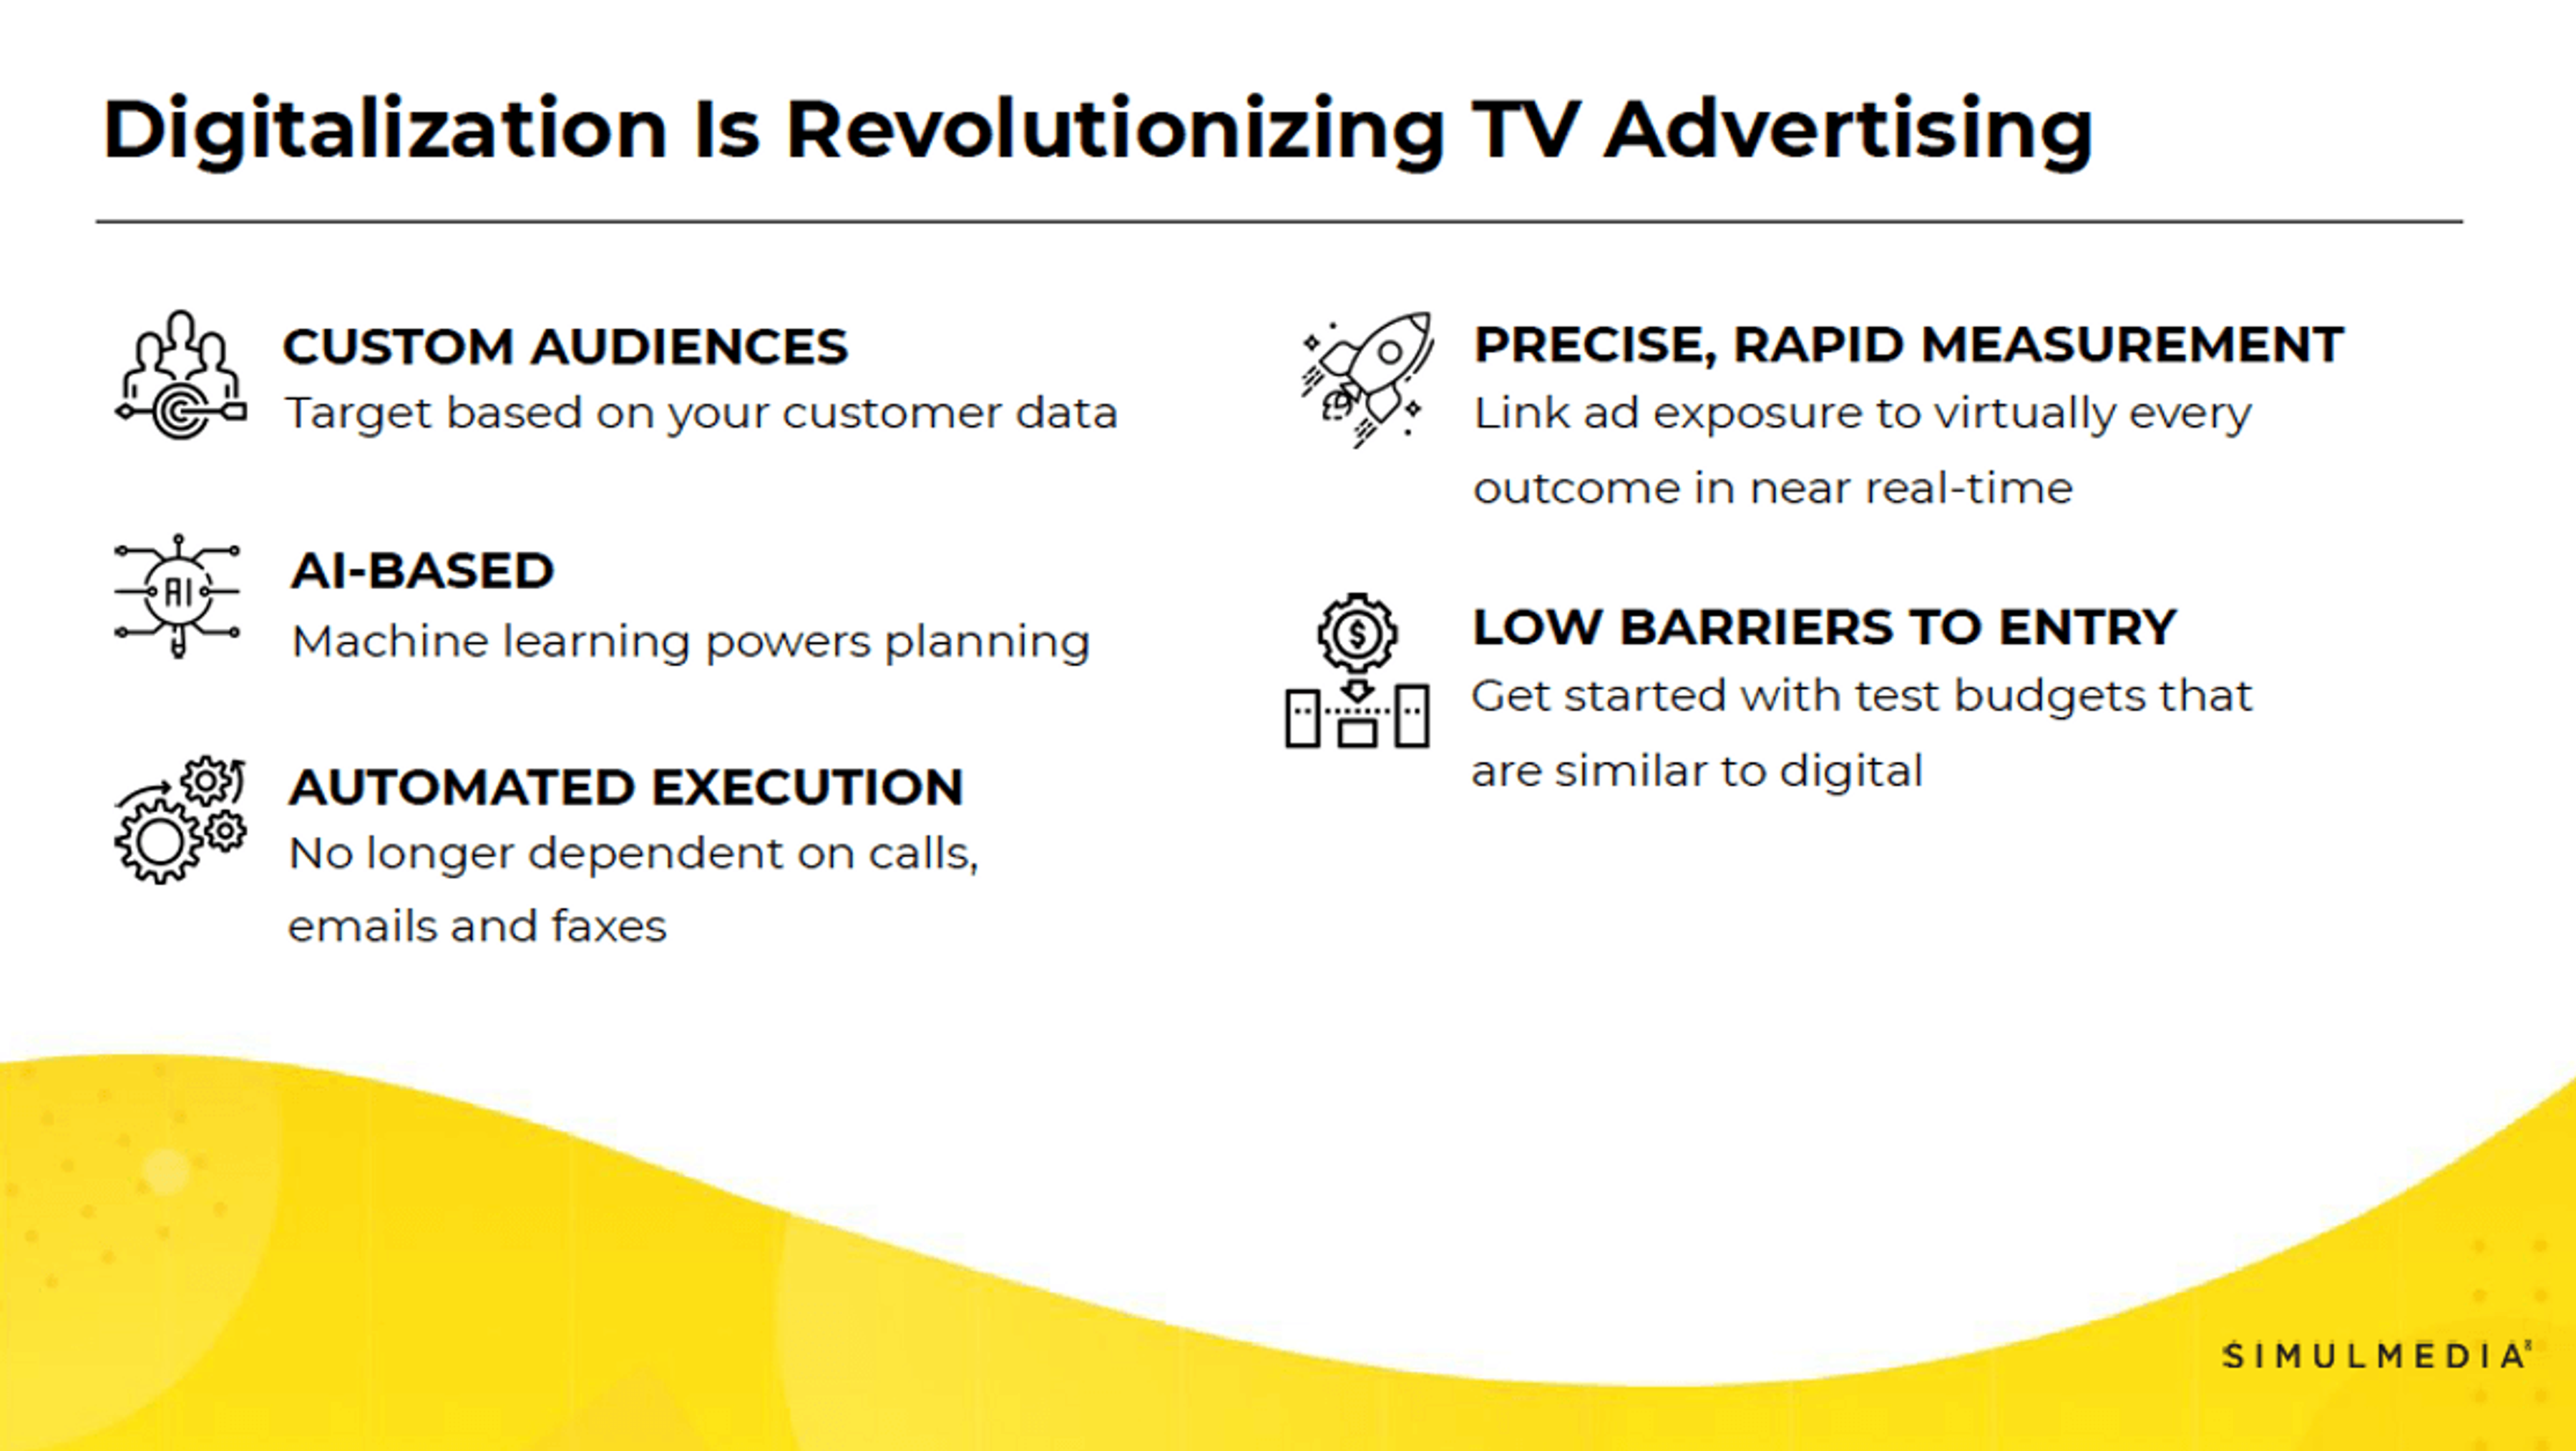 A collection of advancements in the TV advertising space that is making it more similar to digital advertising.